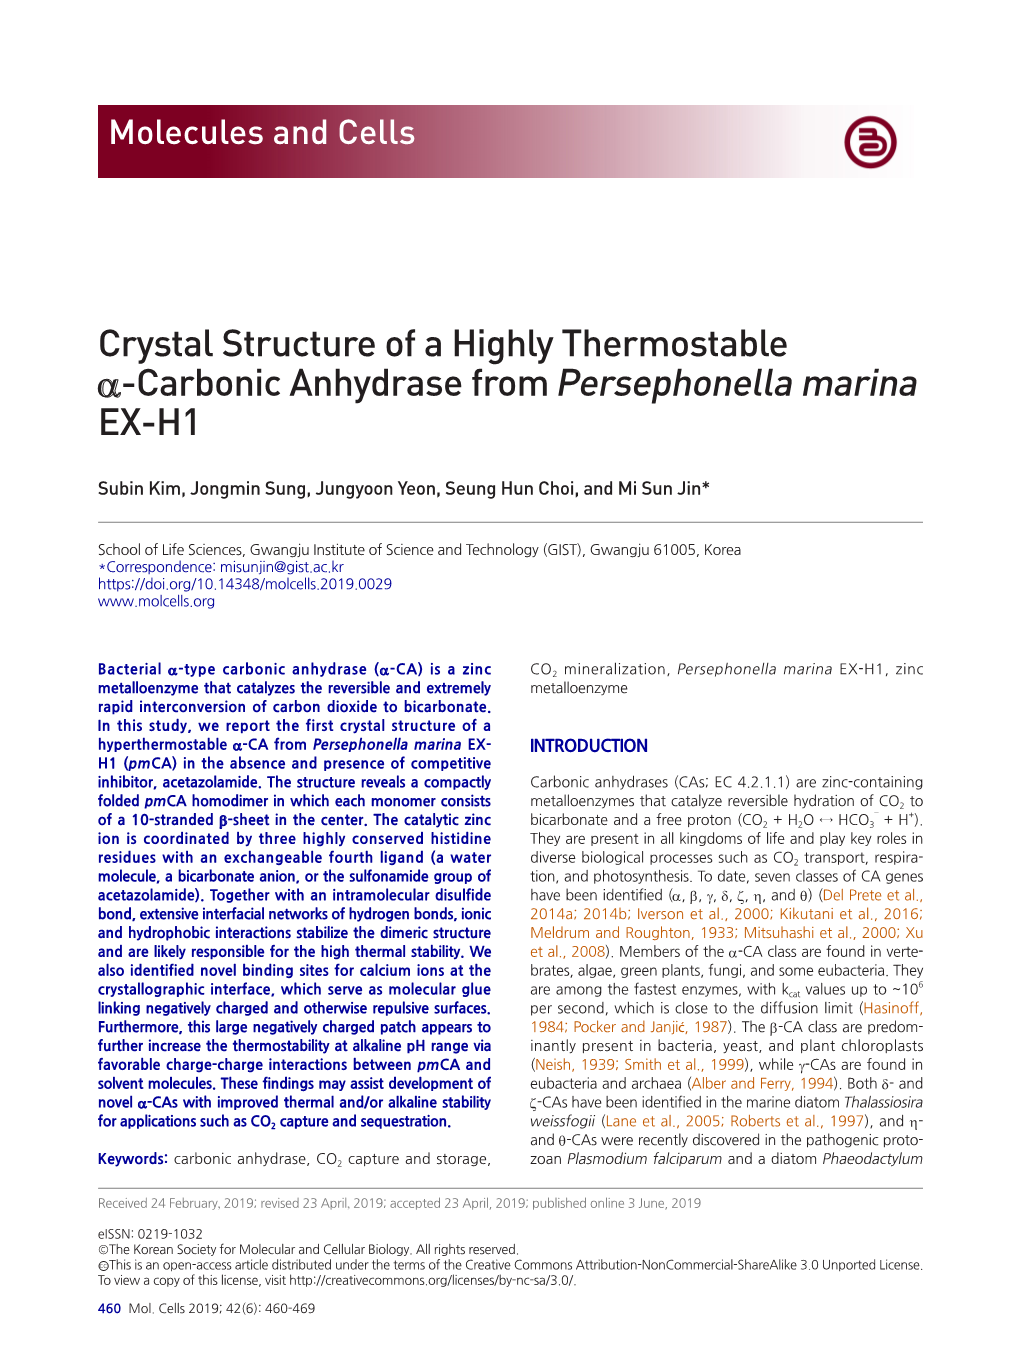 Crystal Structure of a Highly Thermostable Α-Carbonic Anhydrase from Persephonella Marina EX-H1